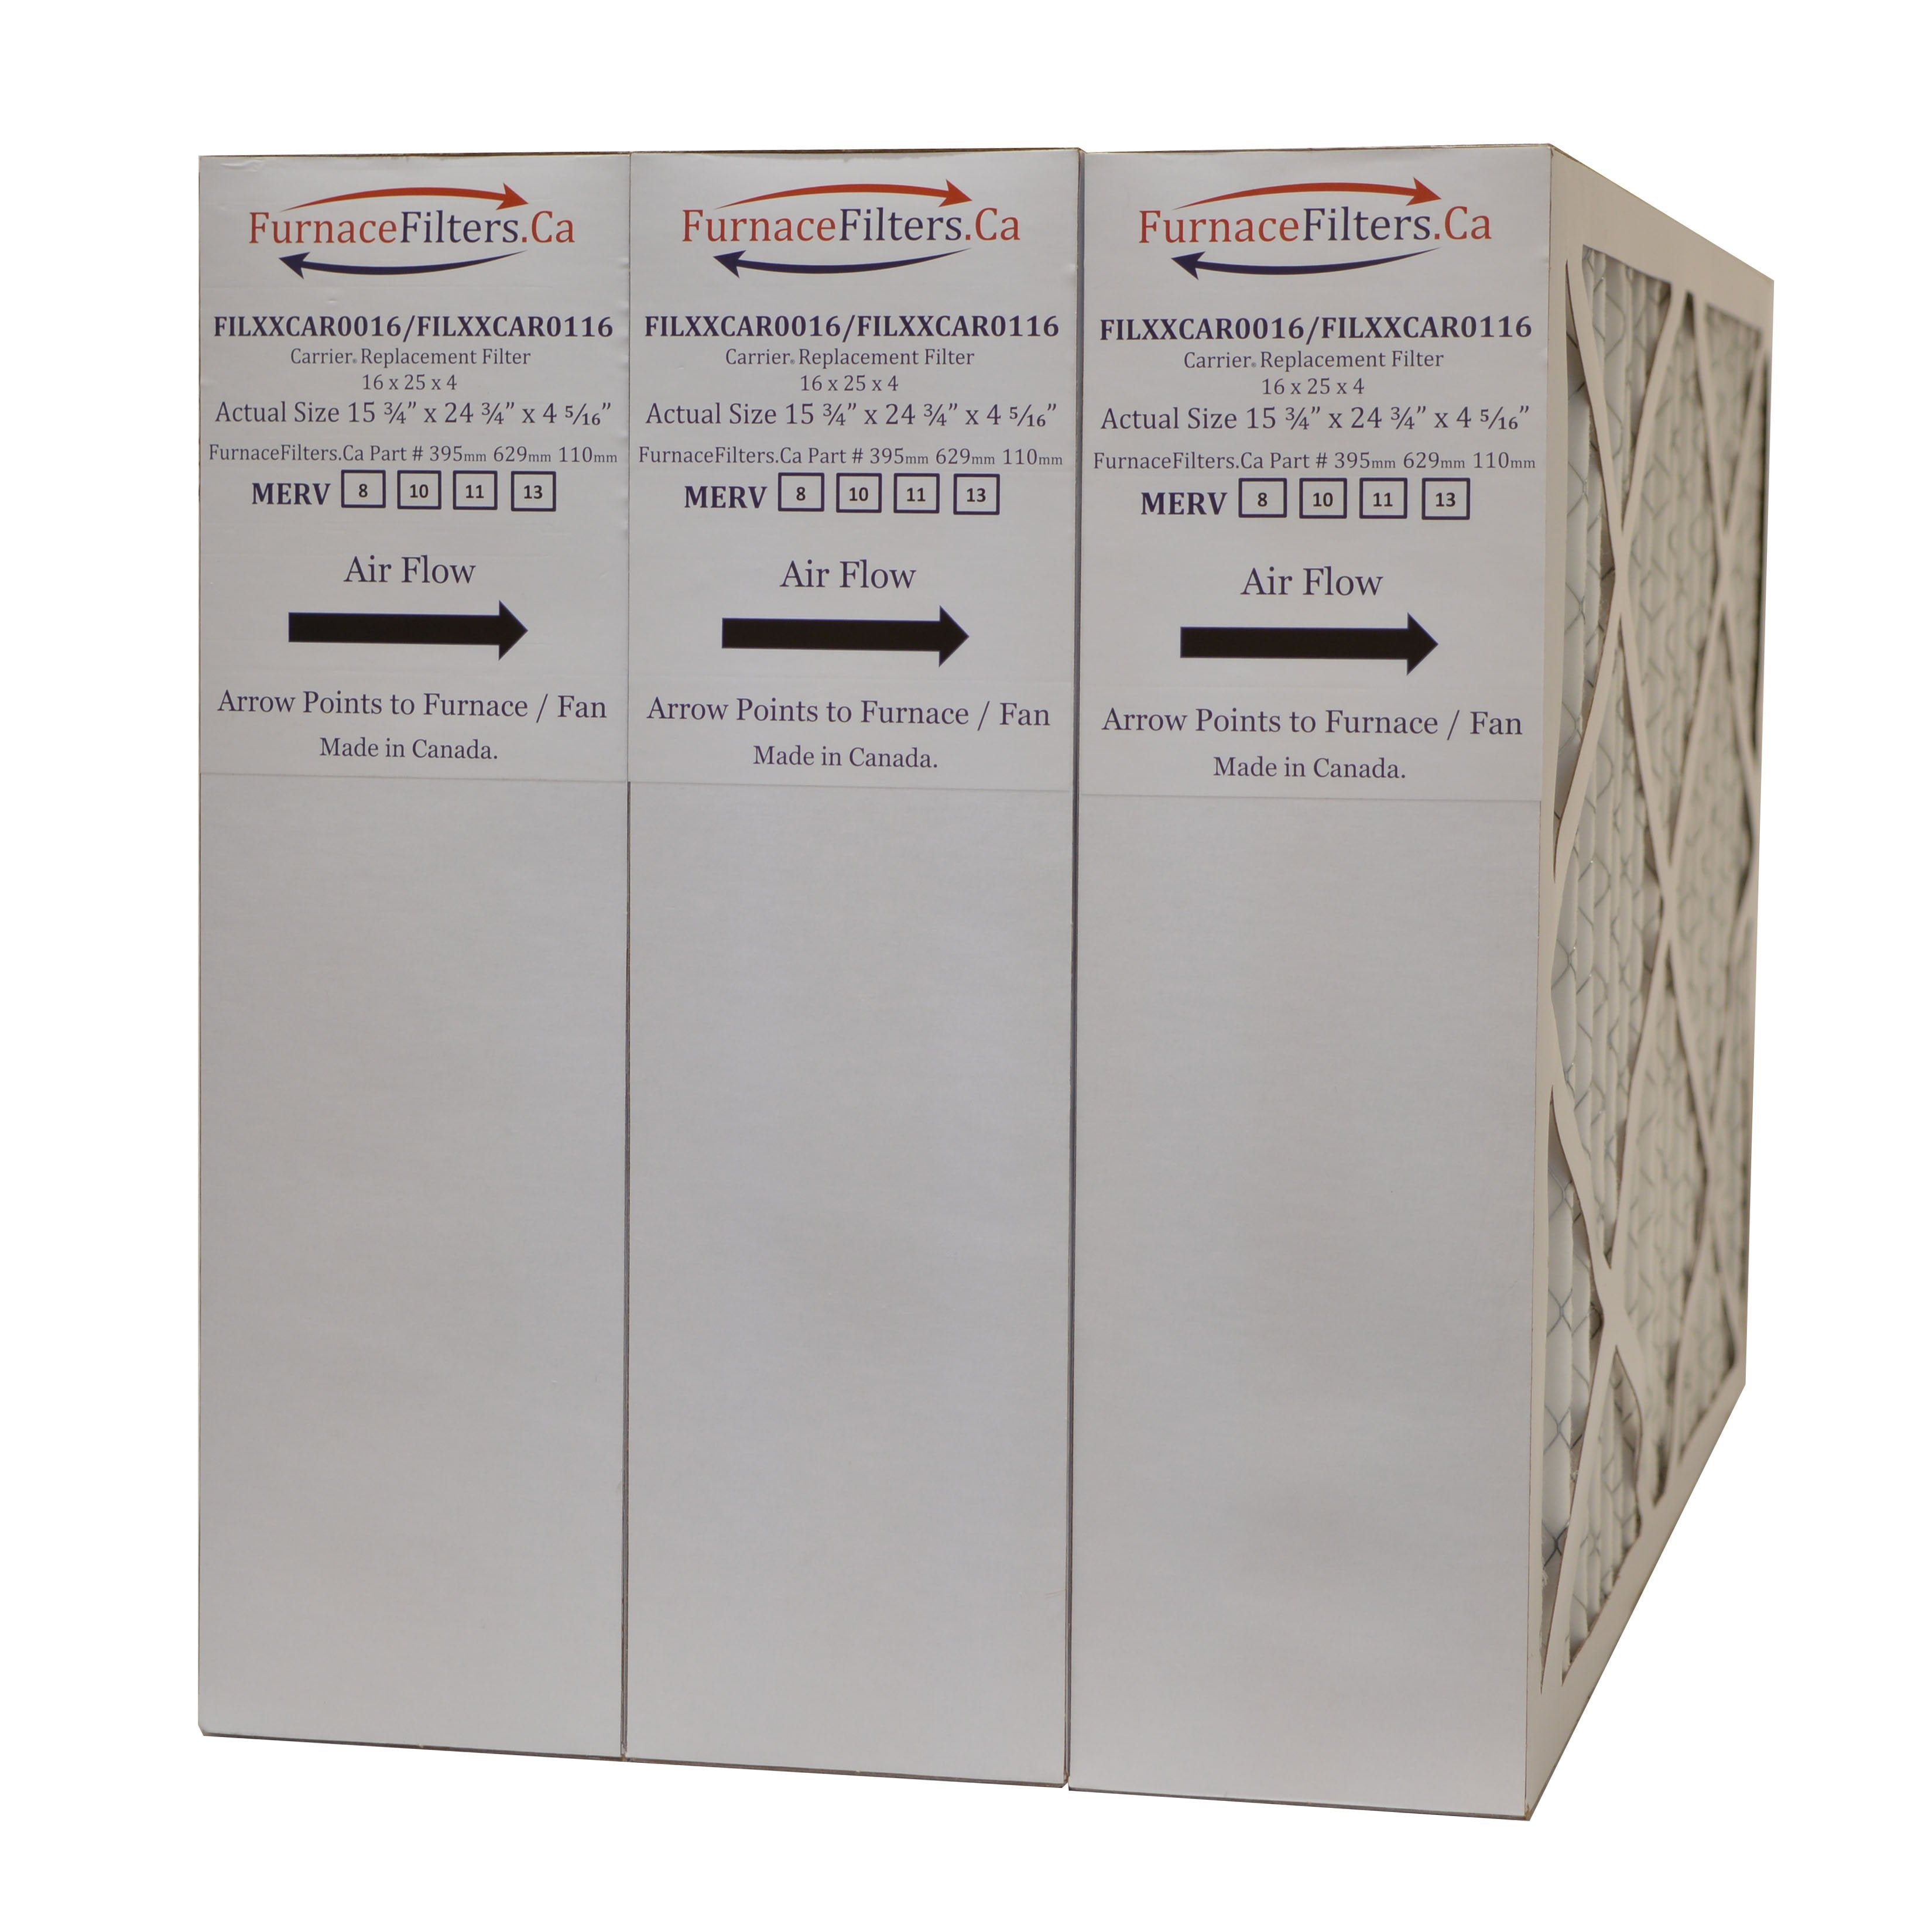 Carrier FILCCCAR0016 Furnace Filter Size 16 x 25 x 4 5/16. MERV 13. - Case of 3 Made in Canada by Furnace Filters.Ca